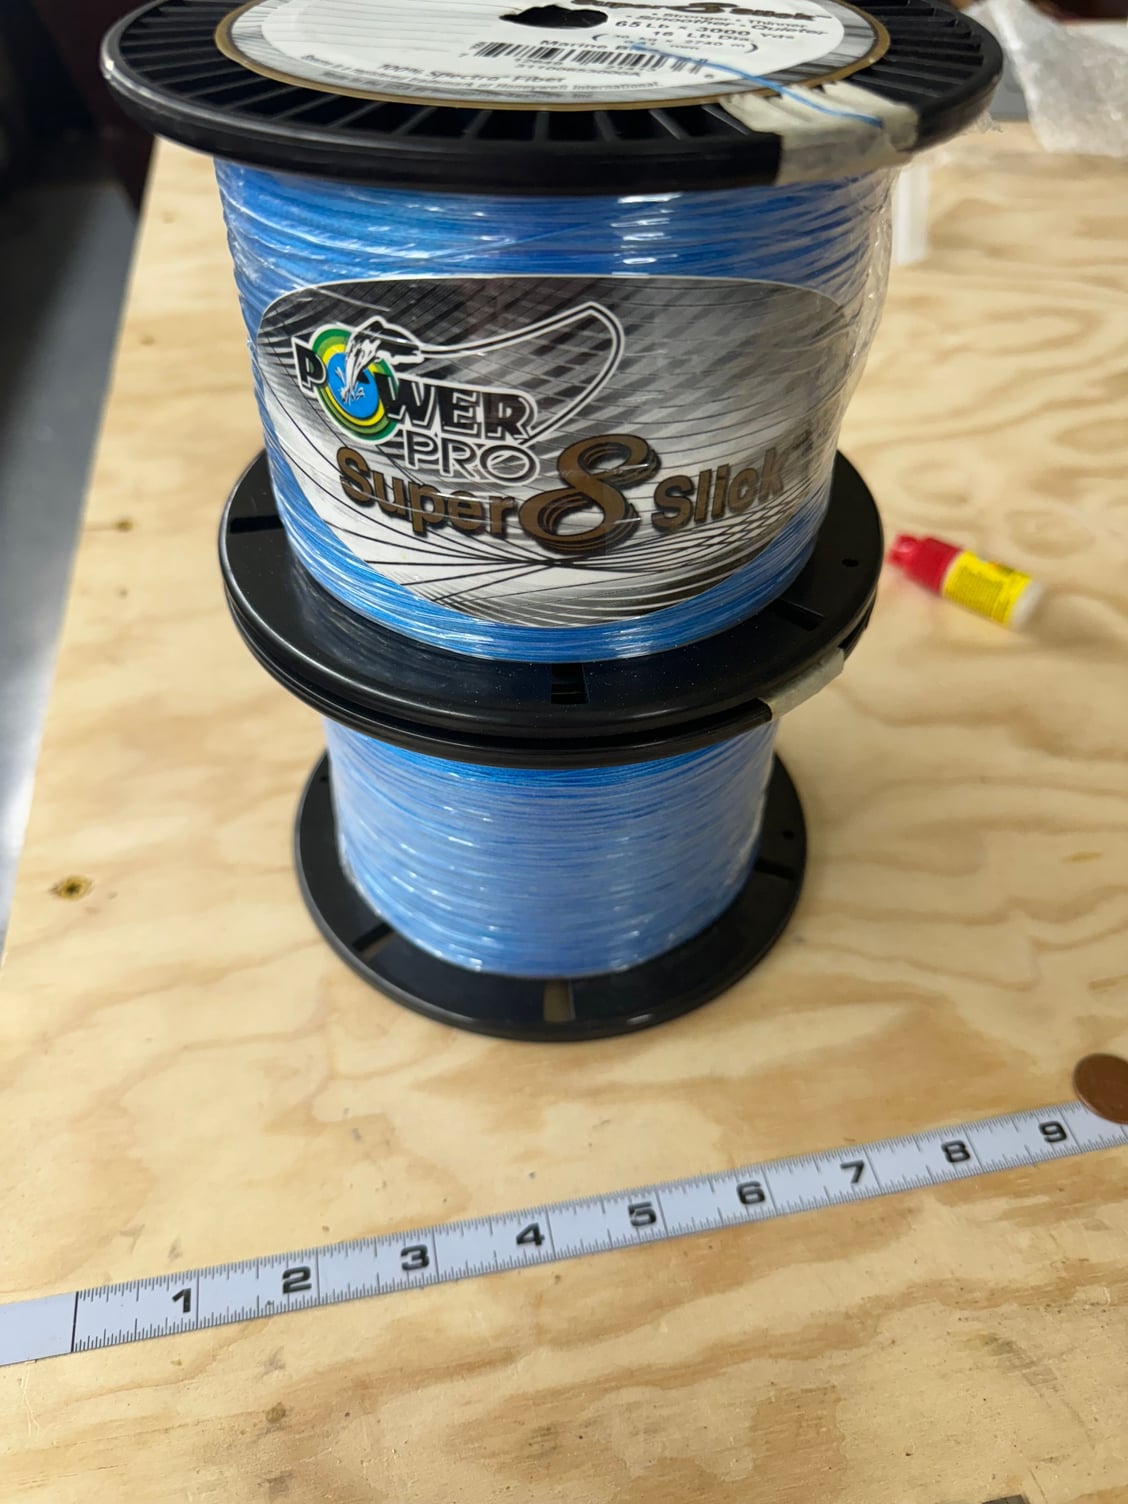 Two 3000 yard spools power pro superslick 8 strand 65LB - The Hull Truth -  Boating and Fishing Forum